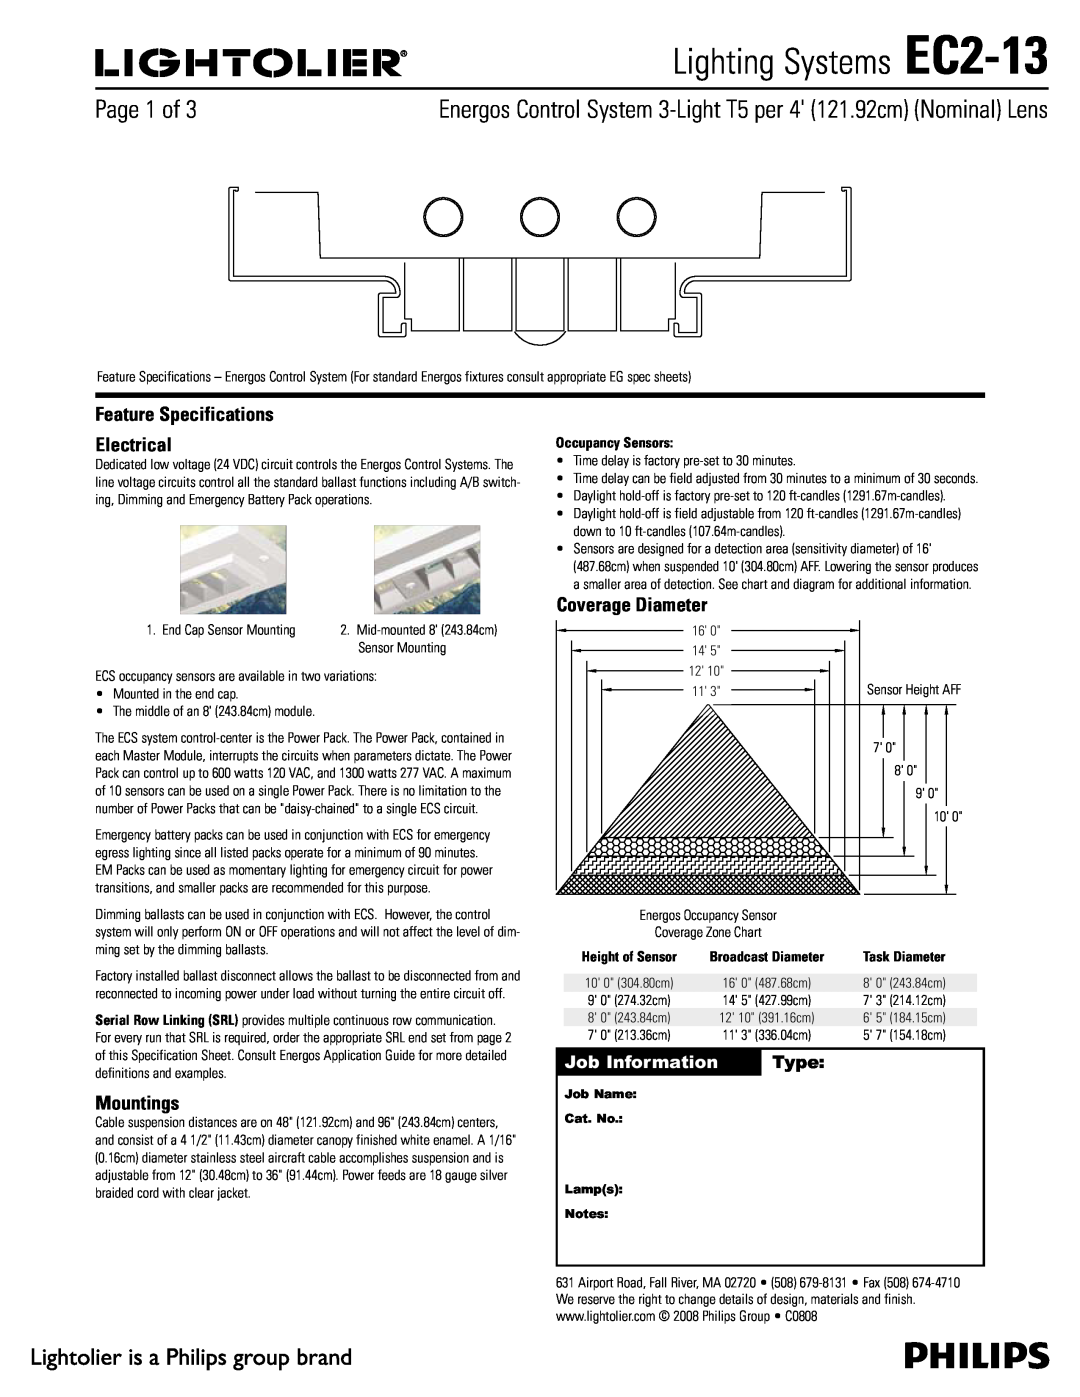 Lightolier specifications Lighting Systems EC2-13, Feature Specifications Electrical, Mountings, Coverage Diameter 